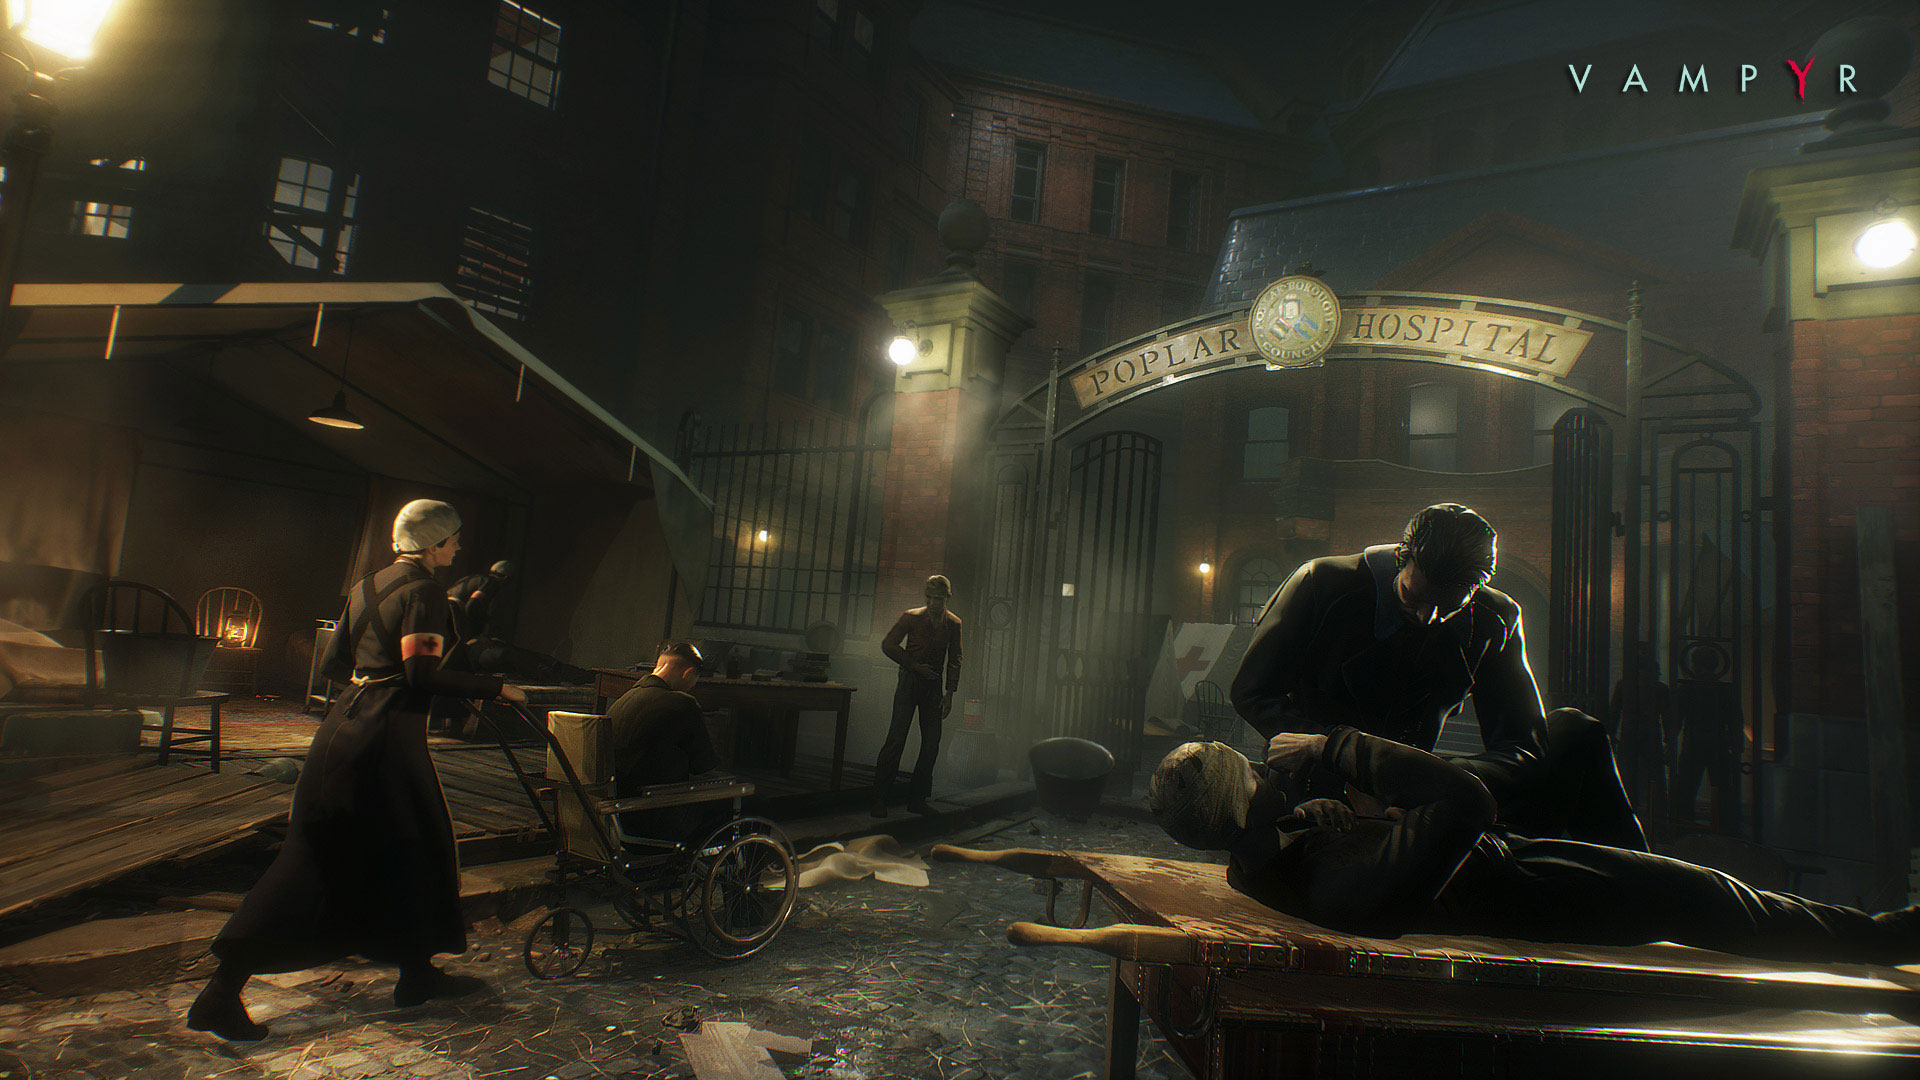 Vampyr Release Date News, Gameplay and More.